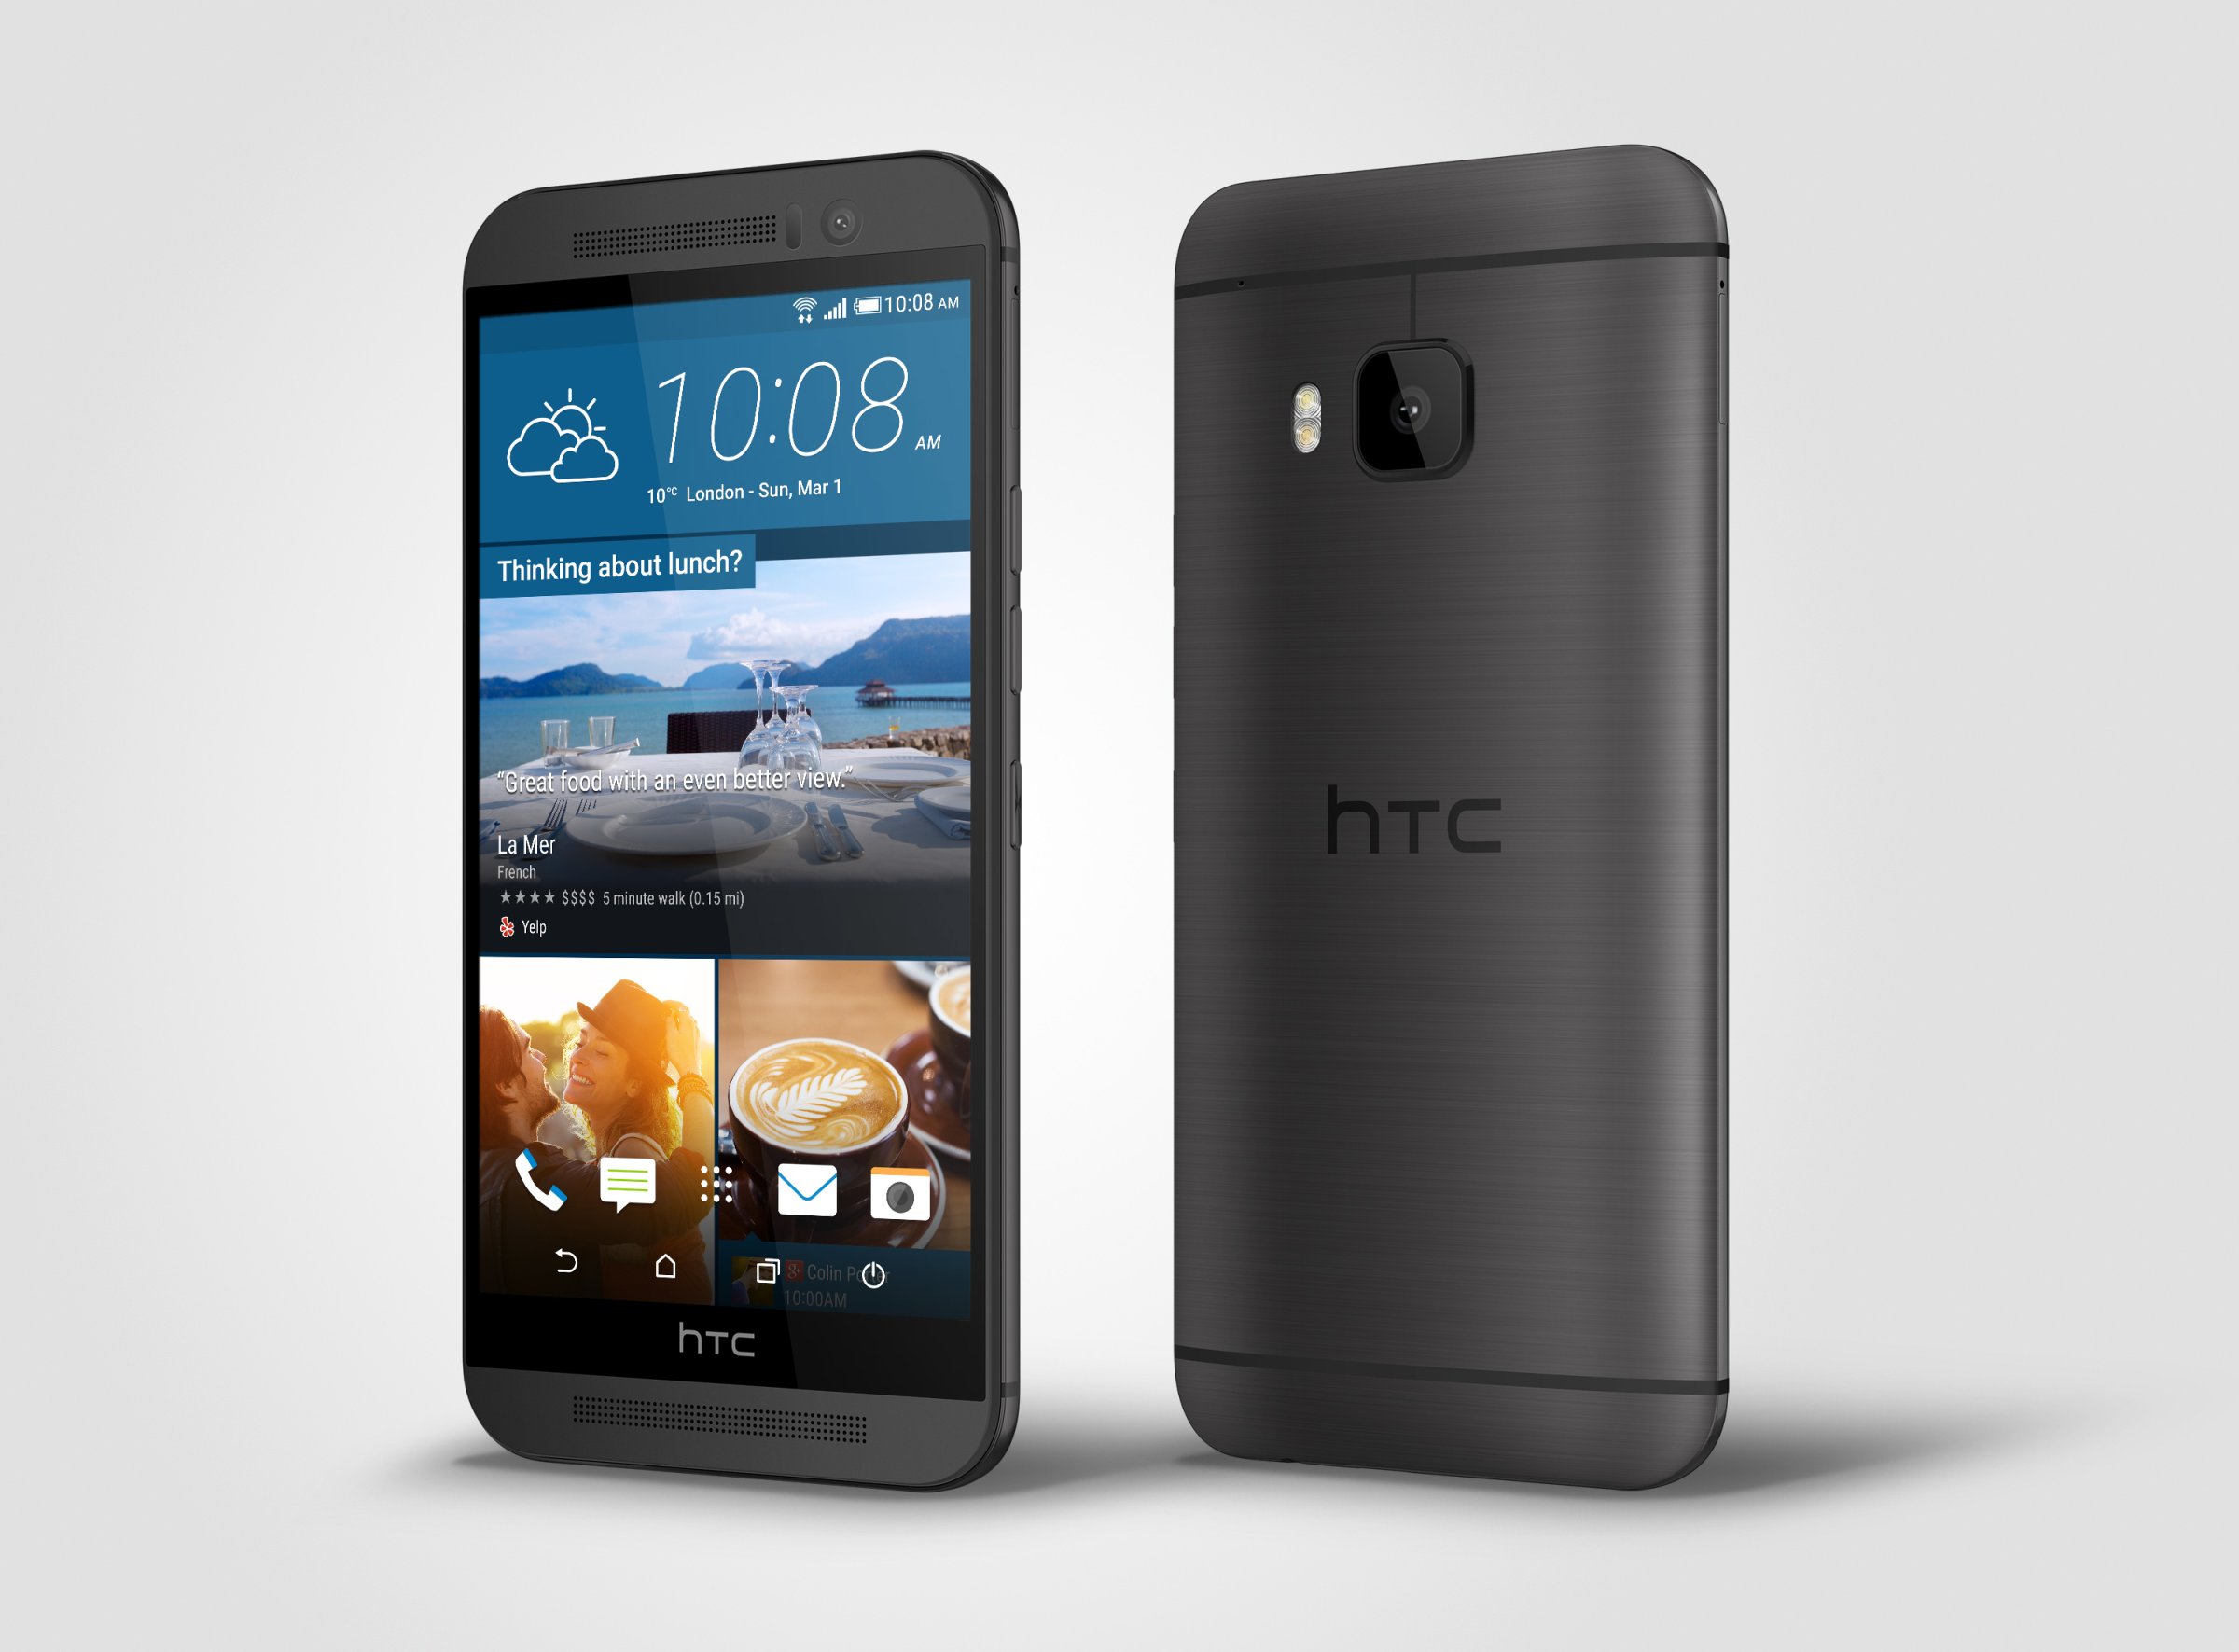 Front and rear views of the HTC One M9 smartphone.